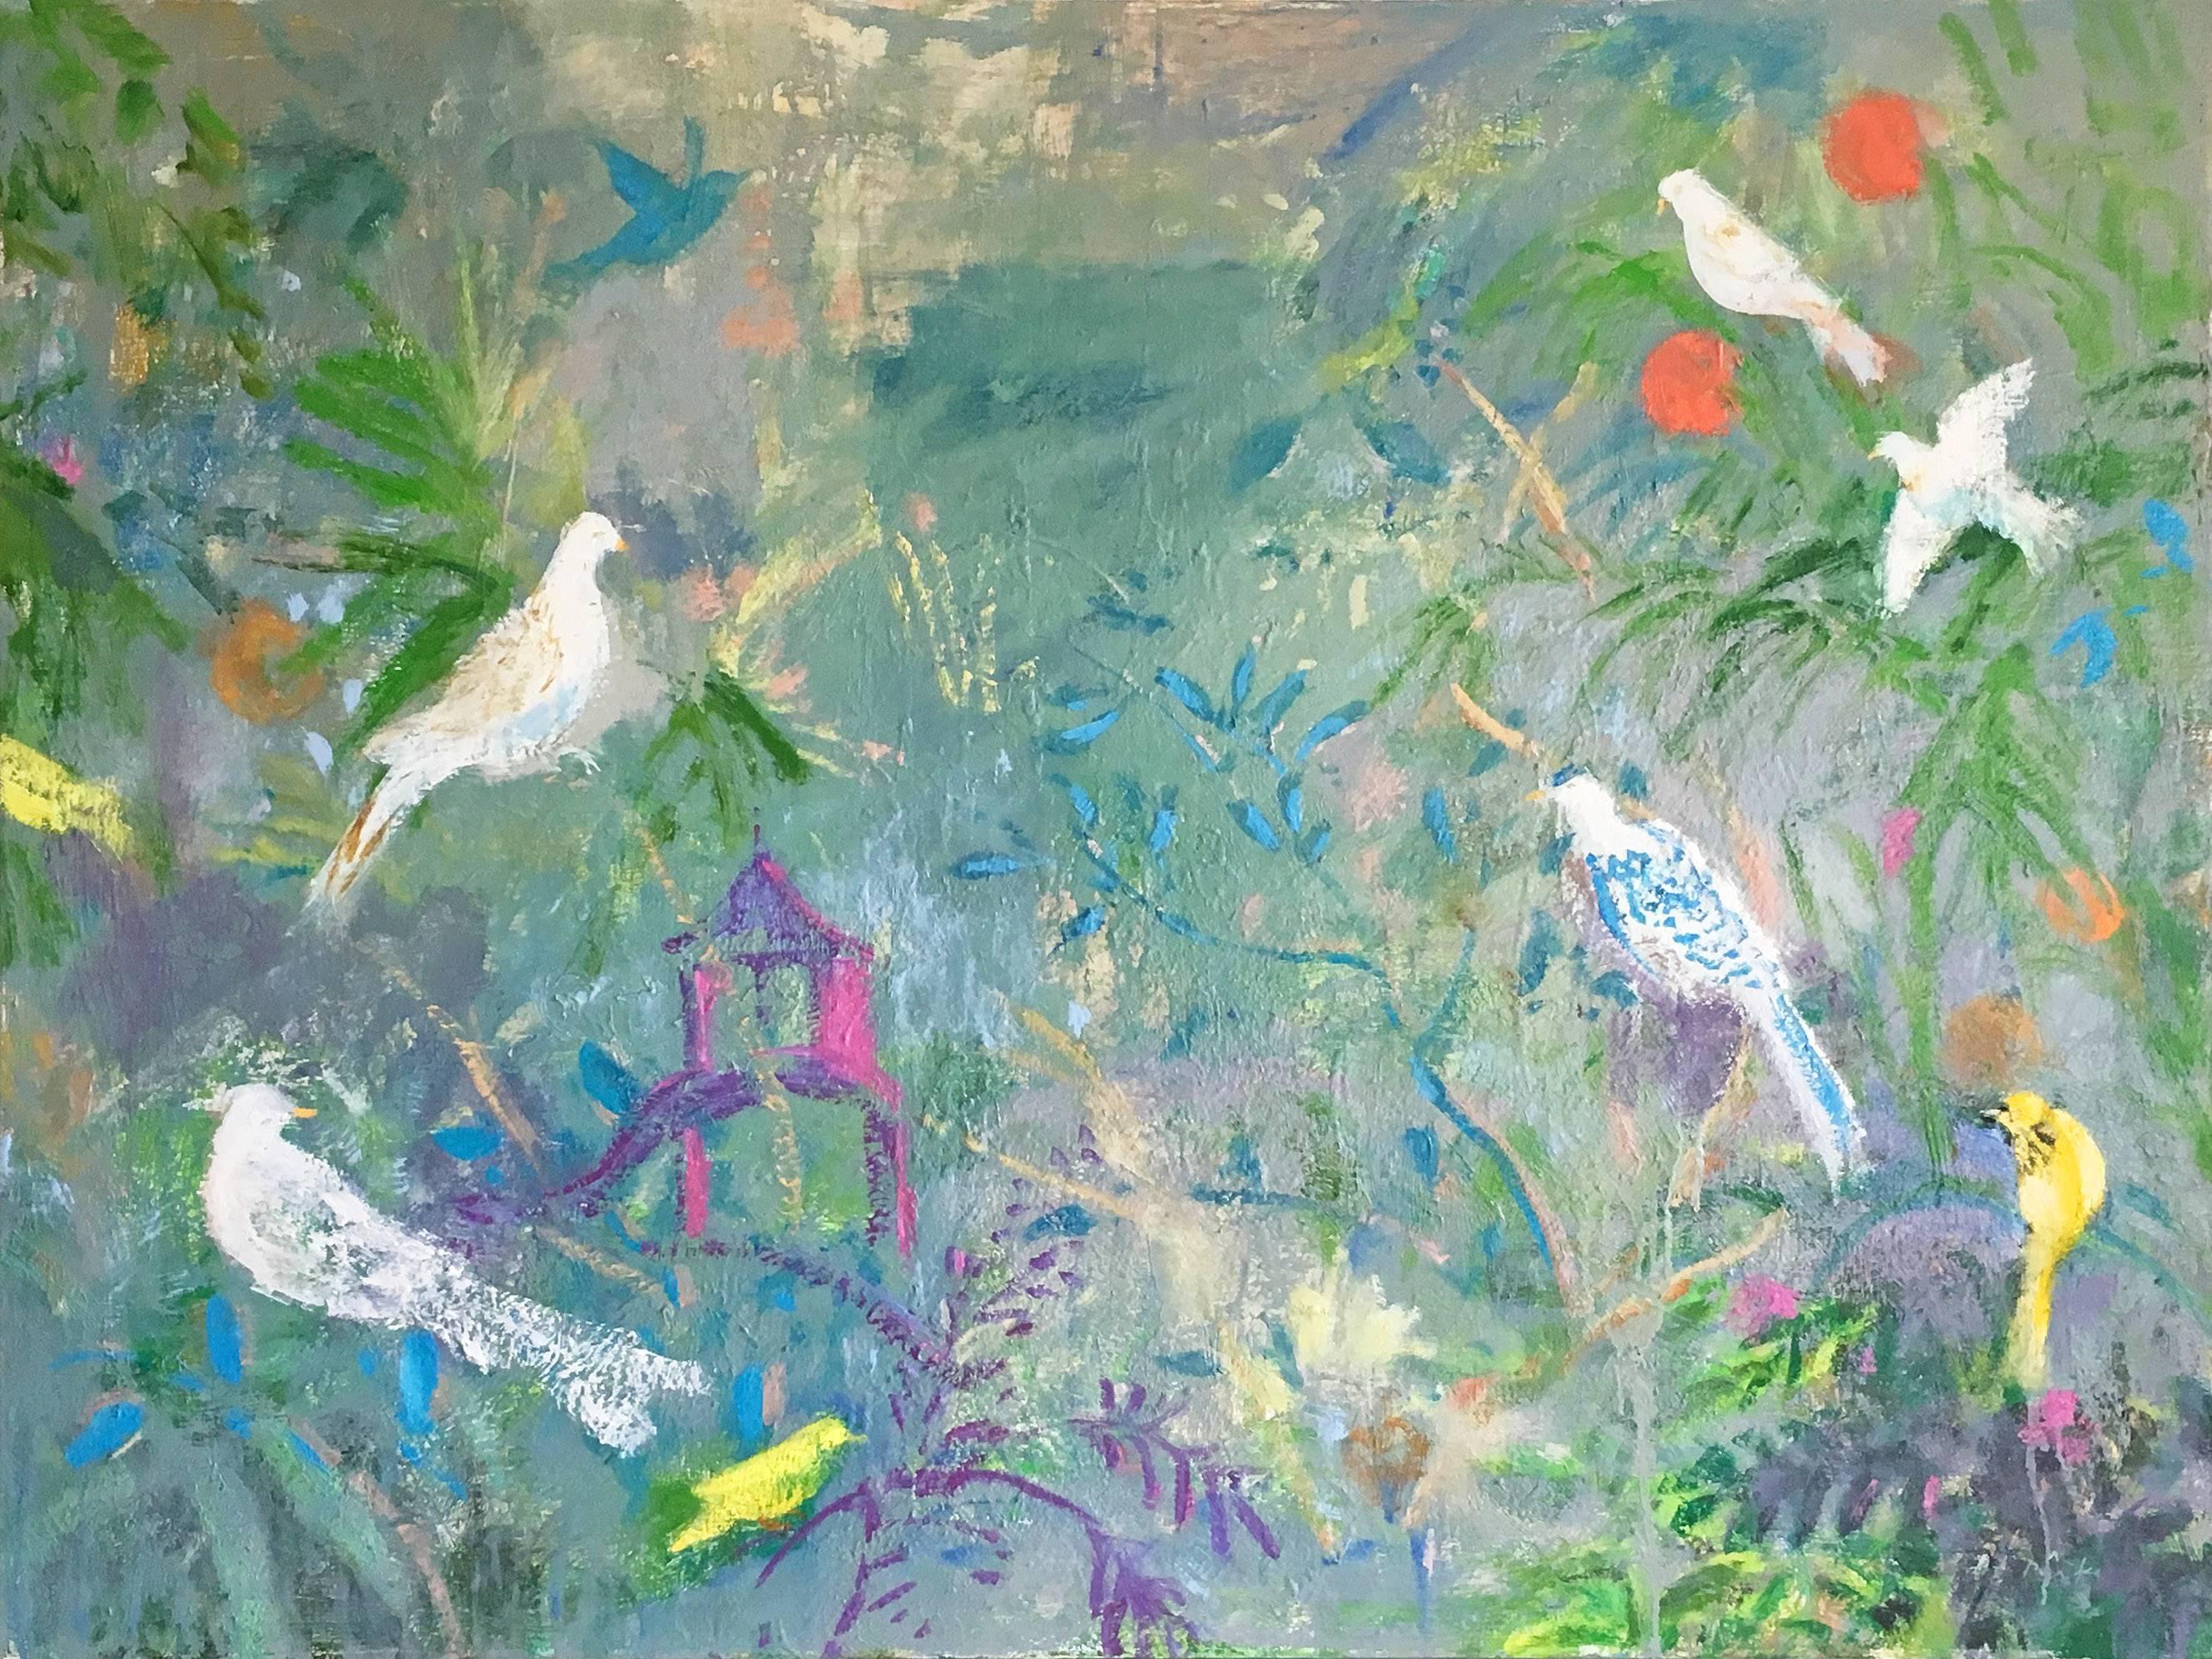 Melanie Parke Animal Painting - After Livia, Gray Blue, Multicolored, Horizontal Serene Abstract Birds in Garden